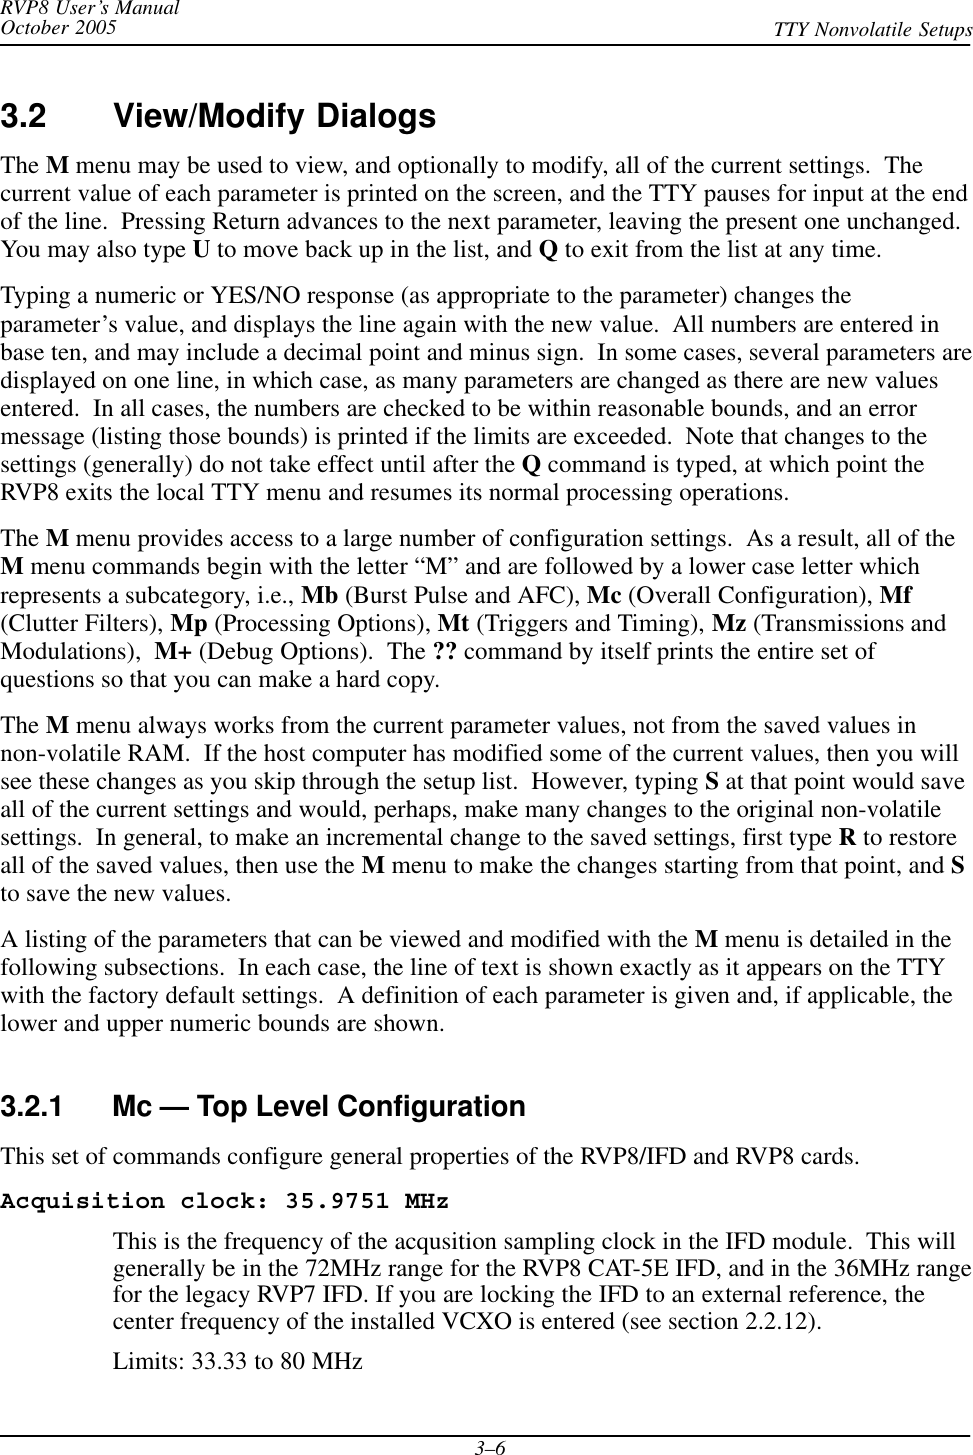 RVP8 User’s ManualOctober 2005 TTY Nonvolatile Setups3–63.2 View/Modify DialogsThe M menu may be used to view, and optionally to modify, all of the current settings.  Thecurrent value of each parameter is printed on the screen, and the TTY pauses for input at the endof the line.  Pressing Return advances to the next parameter, leaving the present one unchanged.You may also type U to move back up in the list, and Q to exit from the list at any time.Typing a numeric or YES/NO response (as appropriate to the parameter) changes theparameter’s value, and displays the line again with the new value.  All numbers are entered inbase ten, and may include a decimal point and minus sign.  In some cases, several parameters aredisplayed on one line, in which case, as many parameters are changed as there are new valuesentered.  In all cases, the numbers are checked to be within reasonable bounds, and an errormessage (listing those bounds) is printed if the limits are exceeded.  Note that changes to thesettings (generally) do not take effect until after the Q command is typed, at which point theRVP8 exits the local TTY menu and resumes its normal processing operations.The M menu provides access to a large number of configuration settings.  As a result, all of theM menu commands begin with the letter “M” and are followed by a lower case letter whichrepresents a subcategory, i.e., Mb (Burst Pulse and AFC), Mc (Overall Configuration), Mf(Clutter Filters), Mp (Processing Options), Mt (Triggers and Timing), Mz (Transmissions andModulations), M+ (Debug Options).  The ?? command by itself prints the entire set ofquestions so that you can make a hard copy.The M menu always works from the current parameter values, not from the saved values innon-volatile RAM.  If the host computer has modified some of the current values, then you willsee these changes as you skip through the setup list.  However, typing S at that point would saveall of the current settings and would, perhaps, make many changes to the original non-volatilesettings.  In general, to make an incremental change to the saved settings, first type R to restoreall of the saved values, then use the M menu to make the changes starting from that point, and Sto save the new values.A listing of the parameters that can be viewed and modified with the M menu is detailed in thefollowing subsections.  In each case, the line of text is shown exactly as it appears on the TTYwith the factory default settings.  A definition of each parameter is given and, if applicable, thelower and upper numeric bounds are shown.3.2.1 Mc — Top Level ConfigurationThis set of commands configure general properties of the RVP8/IFD and RVP8 cards.Acquisition clock: 35.9751 MHzThis is the frequency of the acqusition sampling clock in the IFD module.  This willgenerally be in the 72MHz range for the RVP8 CAT-5E IFD, and in the 36MHz rangefor the legacy RVP7 IFD. If you are locking the IFD to an external reference, thecenter frequency of the installed VCXO is entered (see section 2.2.12).Limits: 33.33 to 80 MHz